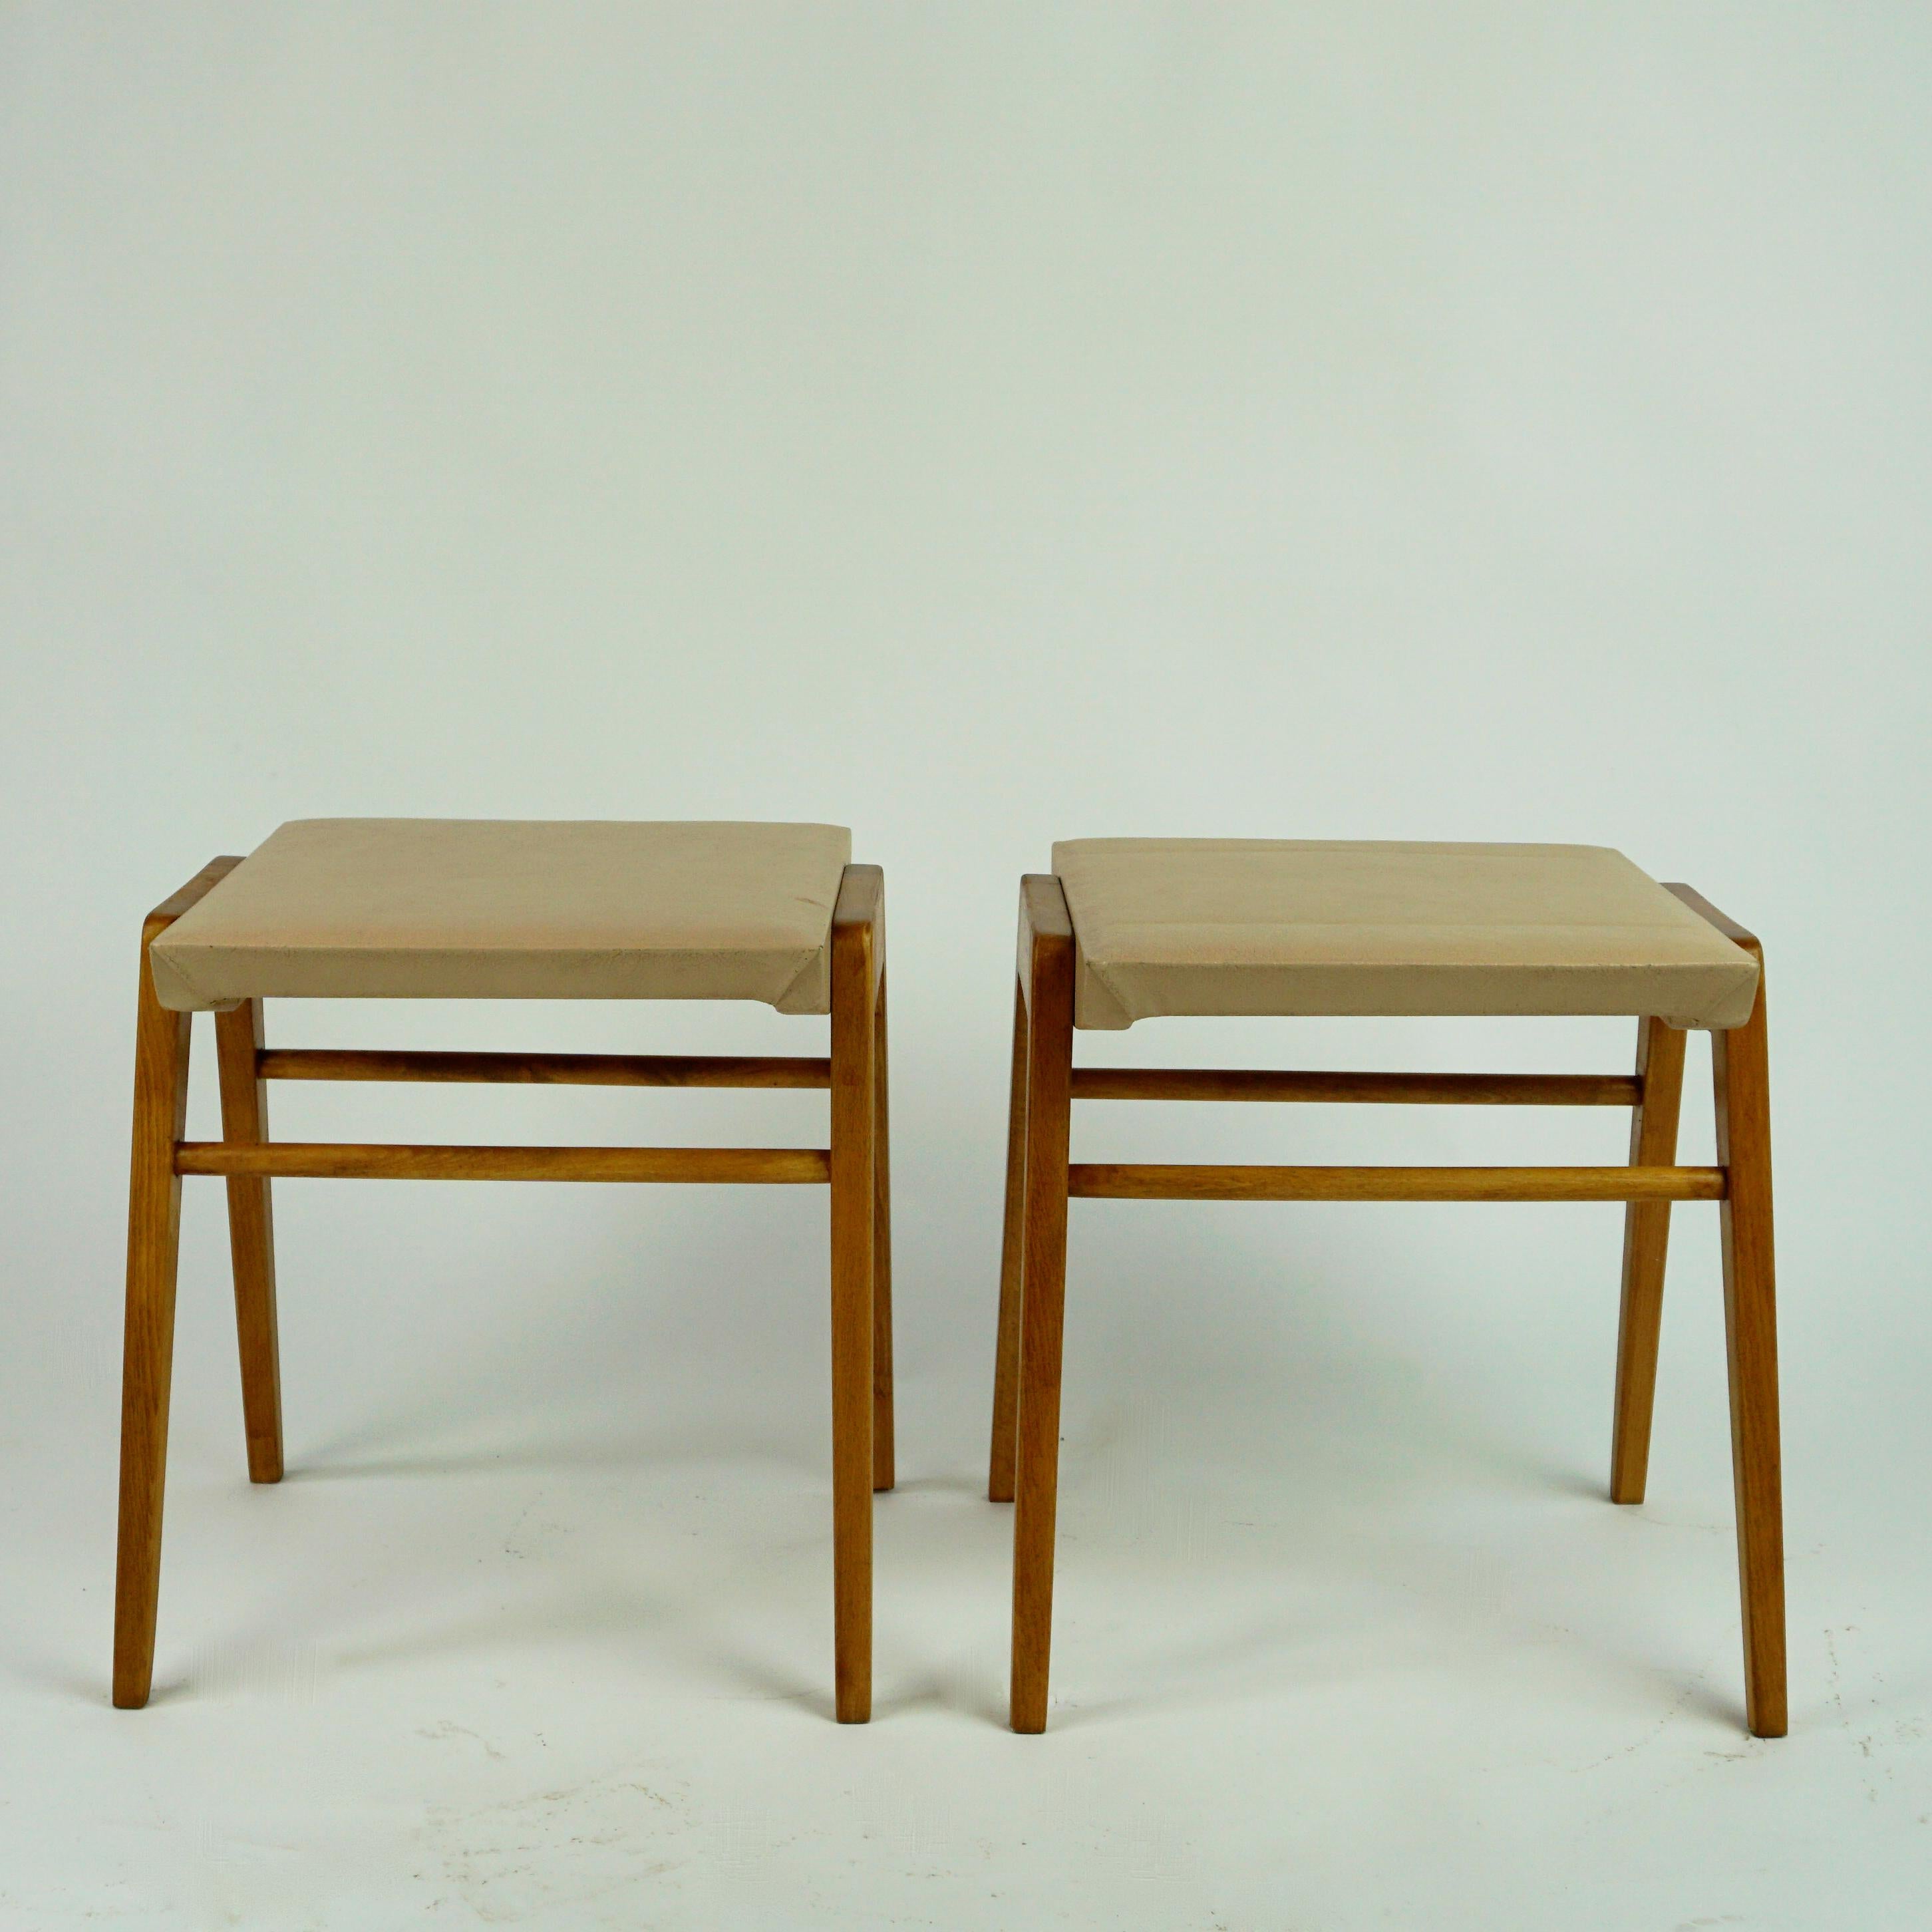 This Pair of Austrian mid-century vintage beechwood and faux leather stools seem to be designed by Roland Rainer and produced by Emil and Alfred Pollak in Vienna as they are very similar to the famous Wiener Stadthallenstuhl by this very imortant